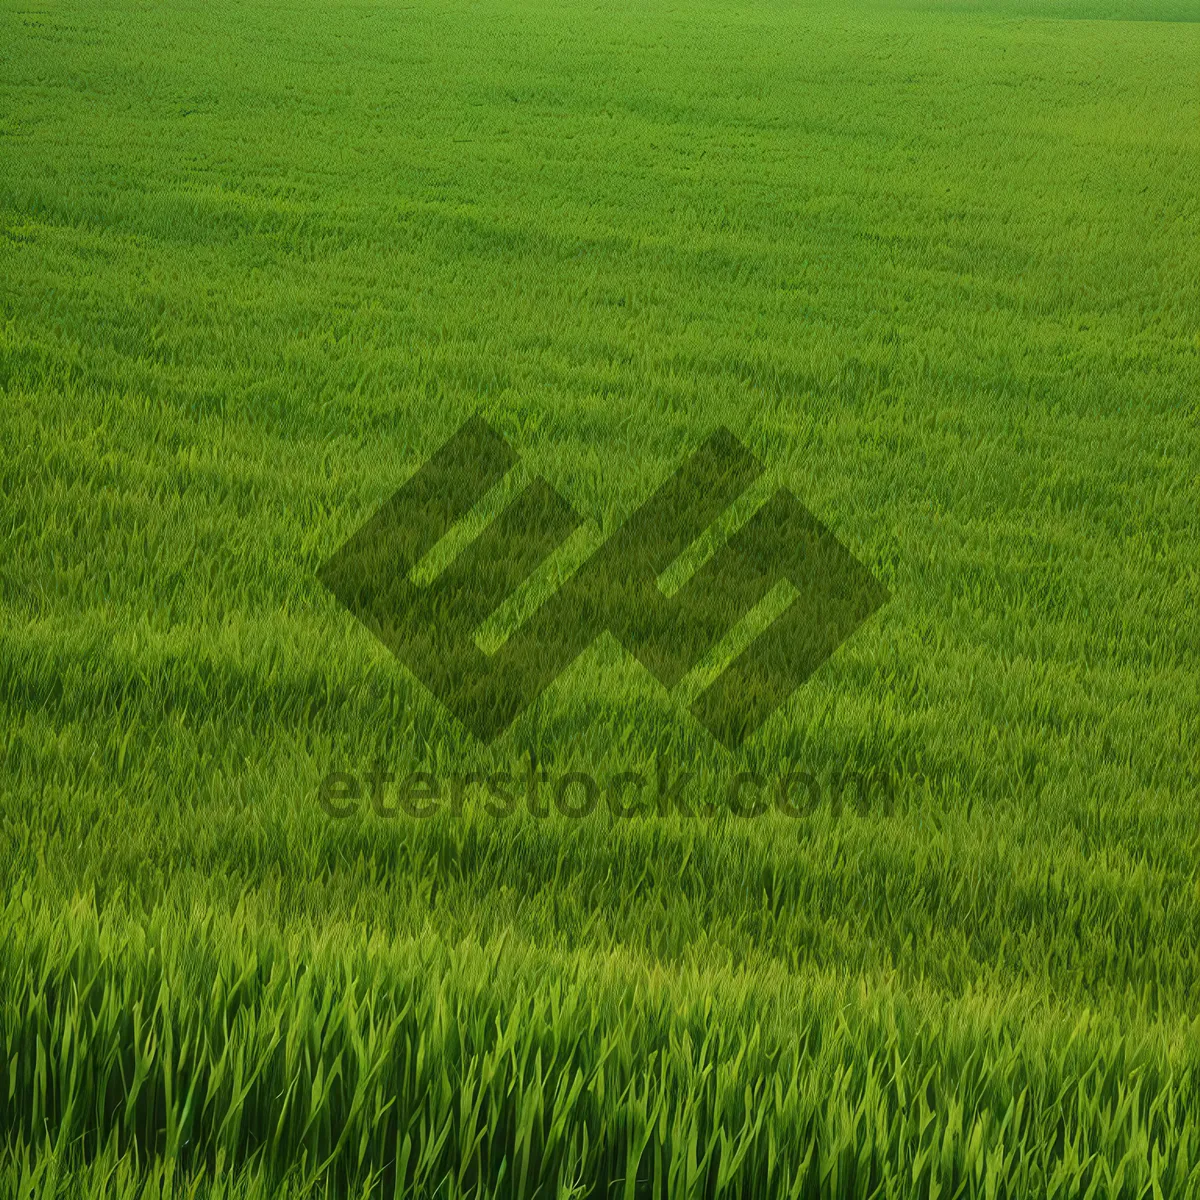 Picture of Lush Wheat Field in Summer Landscape